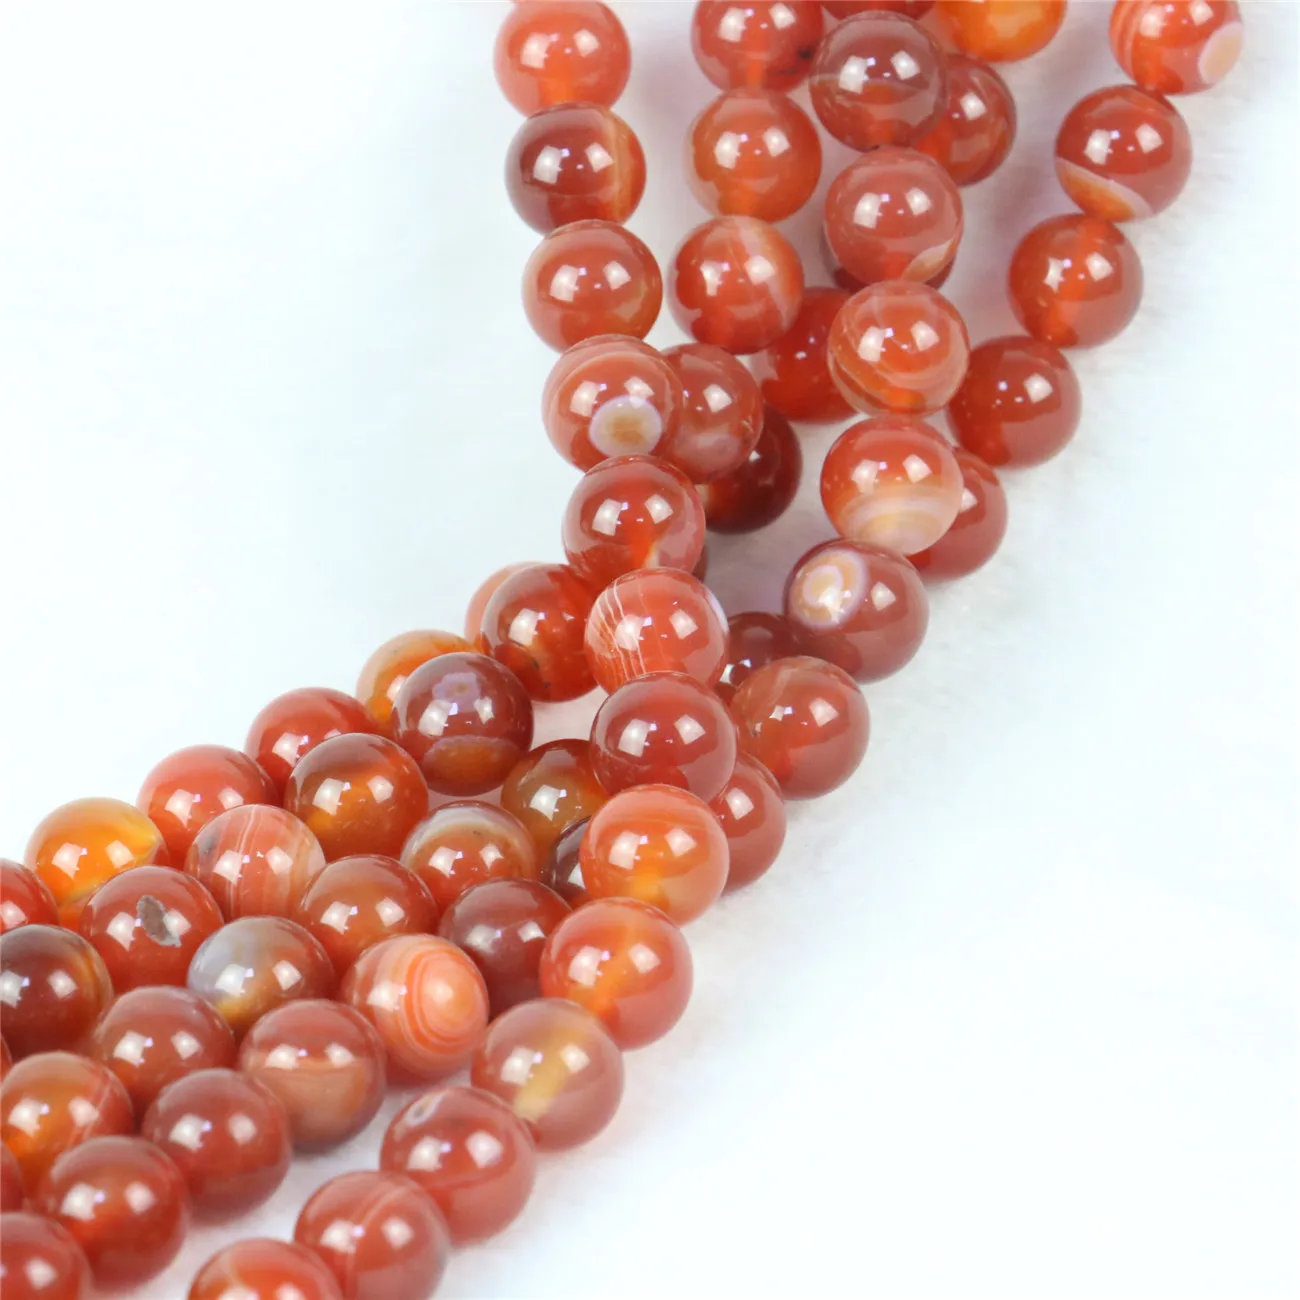 

10mm Round Red Stripe Agates Onyx Loose Beads Natural Stone Women Girls Accessories Parts DIY Hand Made Fashion Jewelry Design